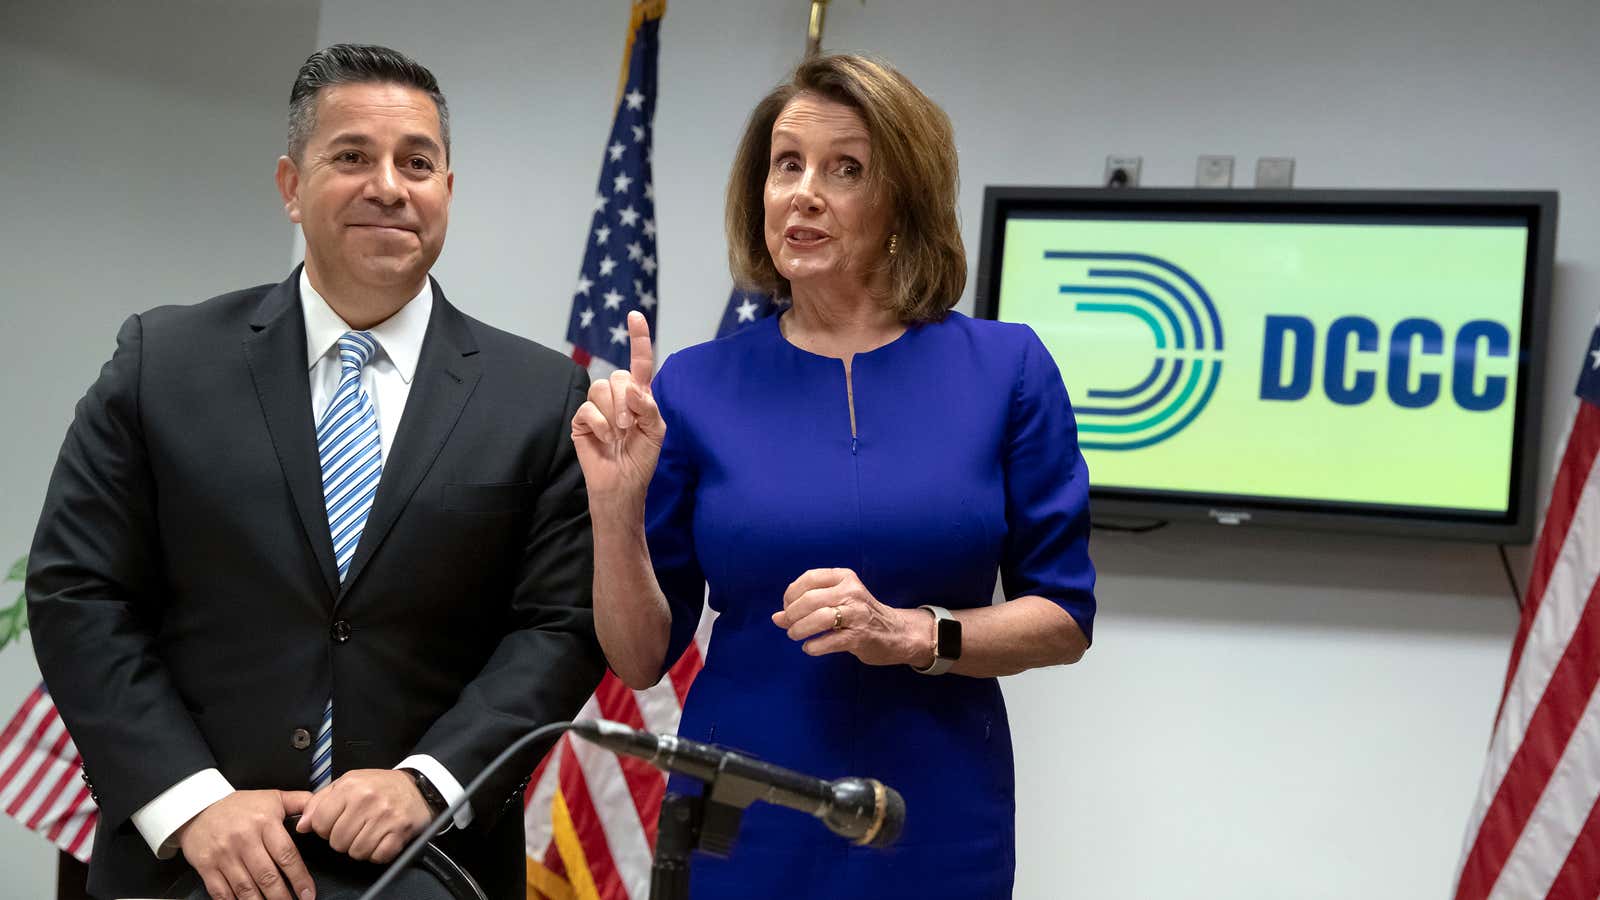 Rep. Ben Ray Lujan gets campaign pointers from minority leader Nancy Pelosi.